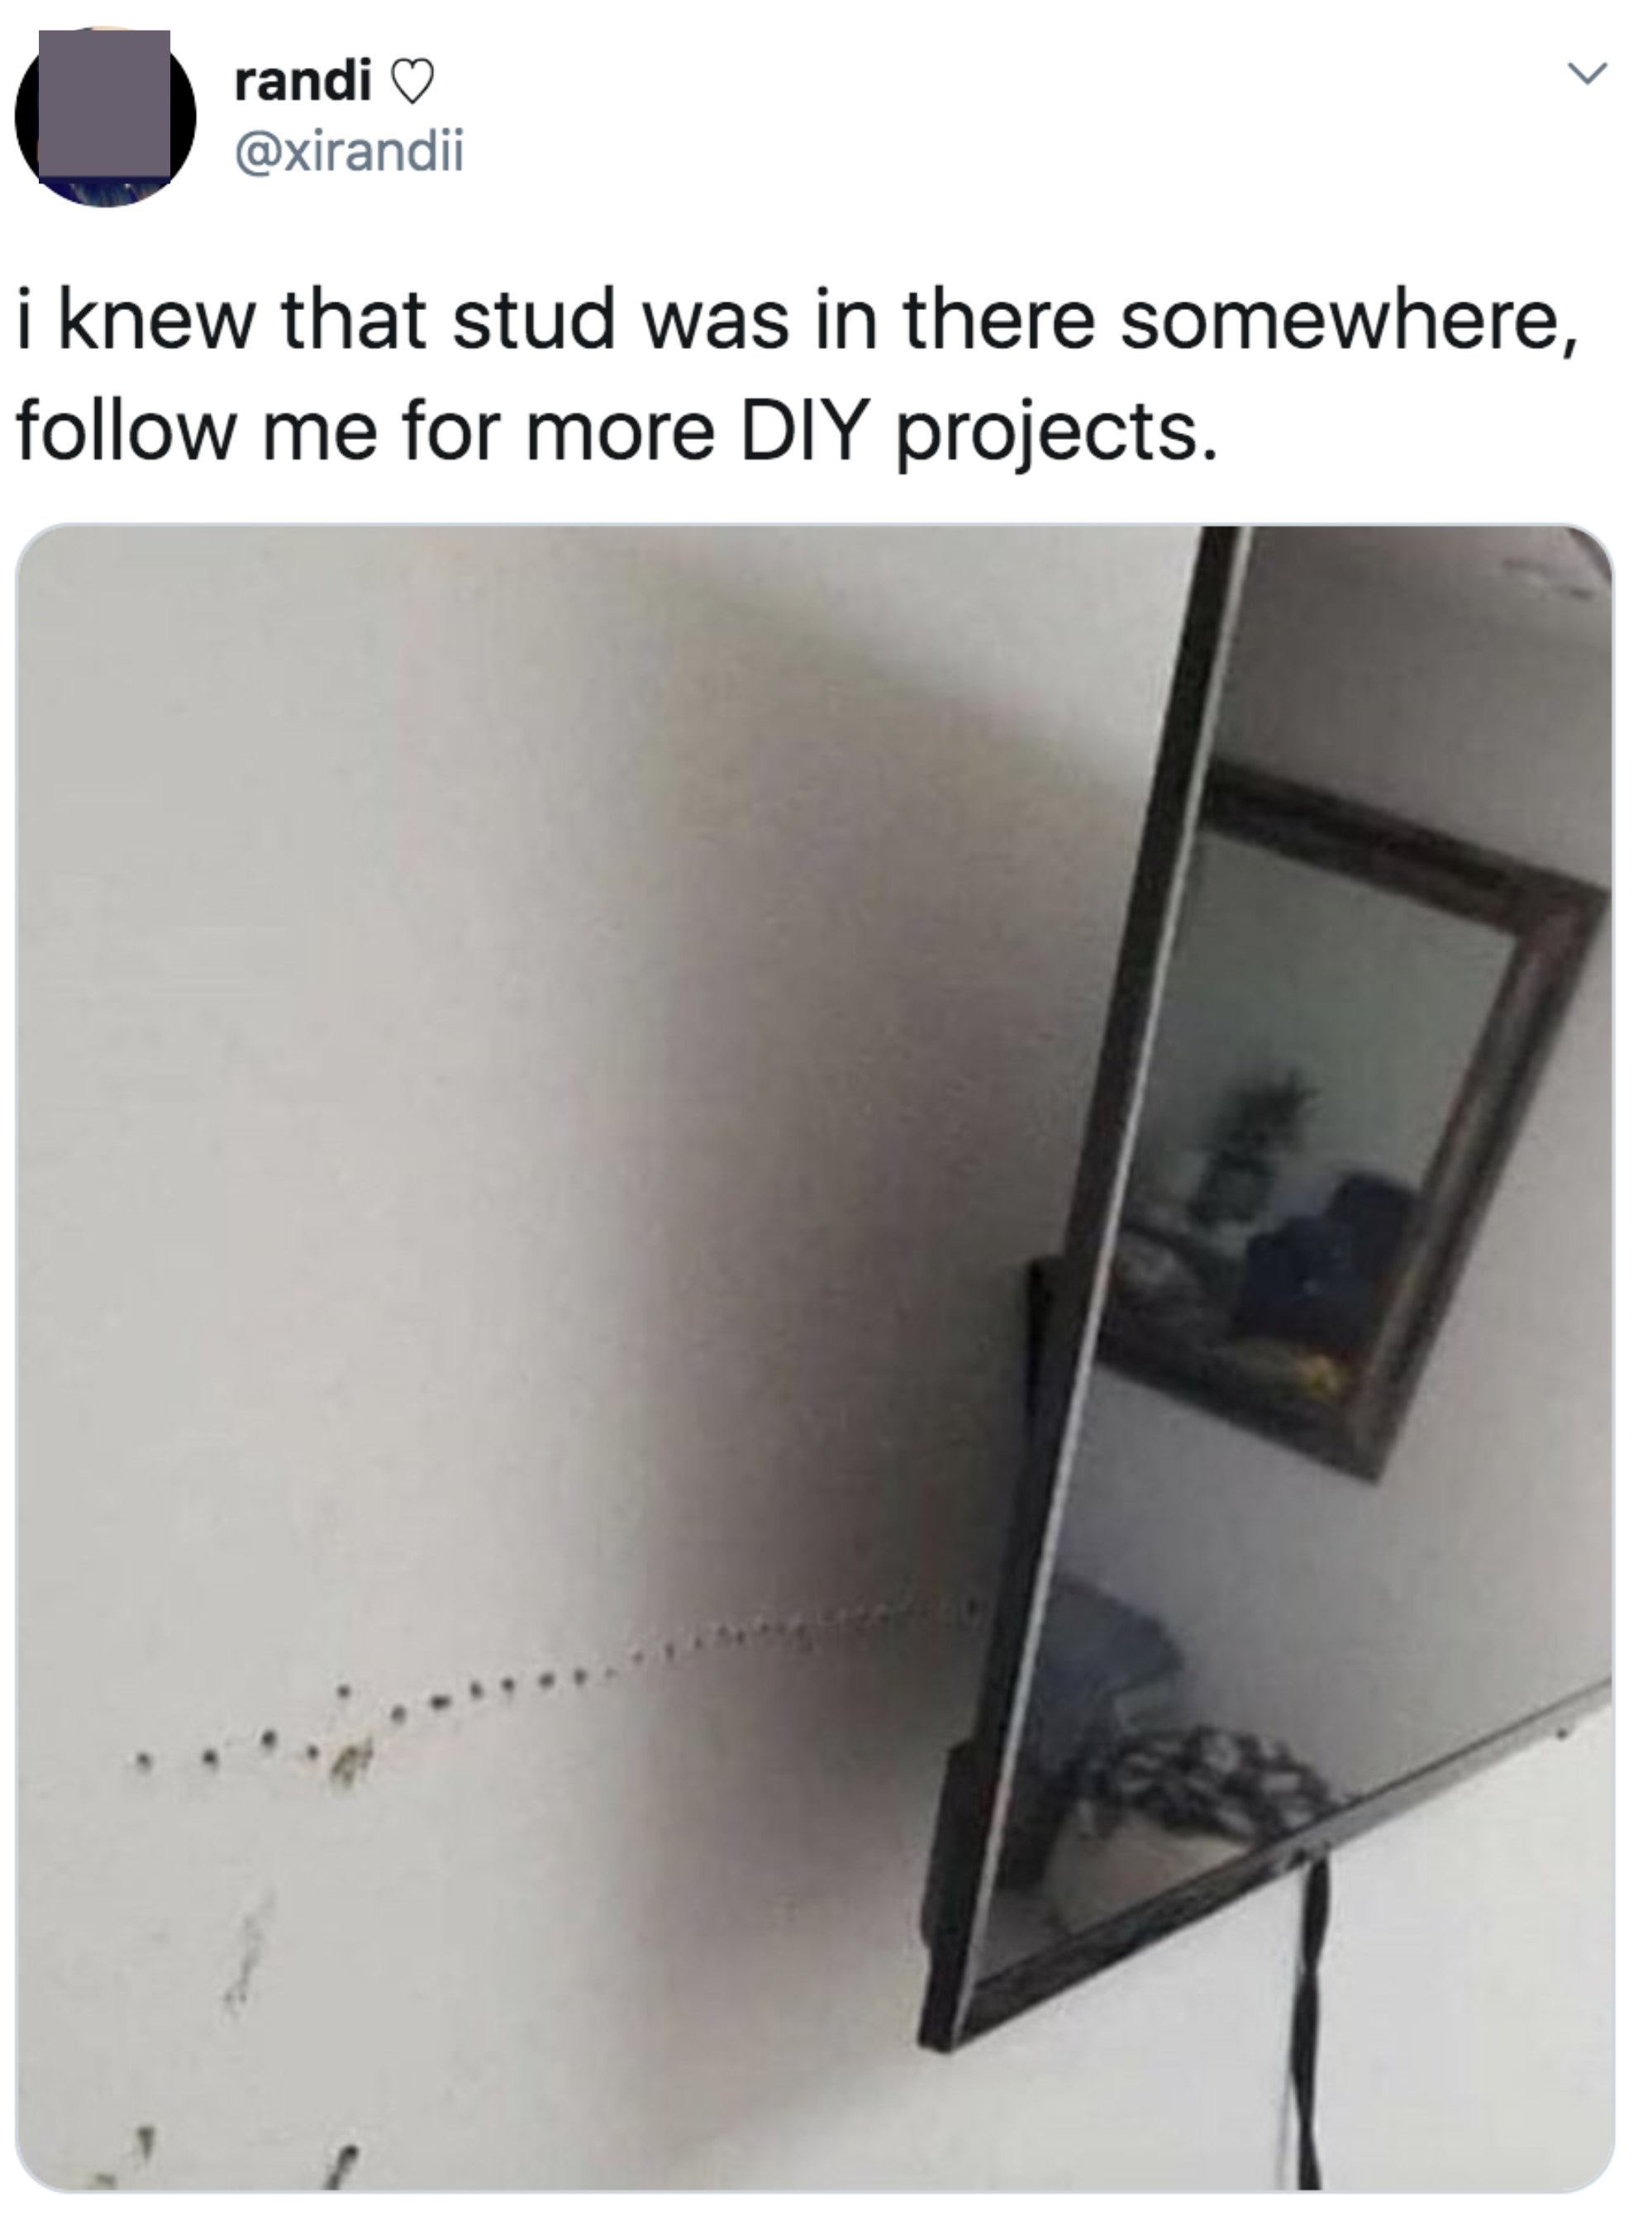 Many holes in a wall looking for a stud